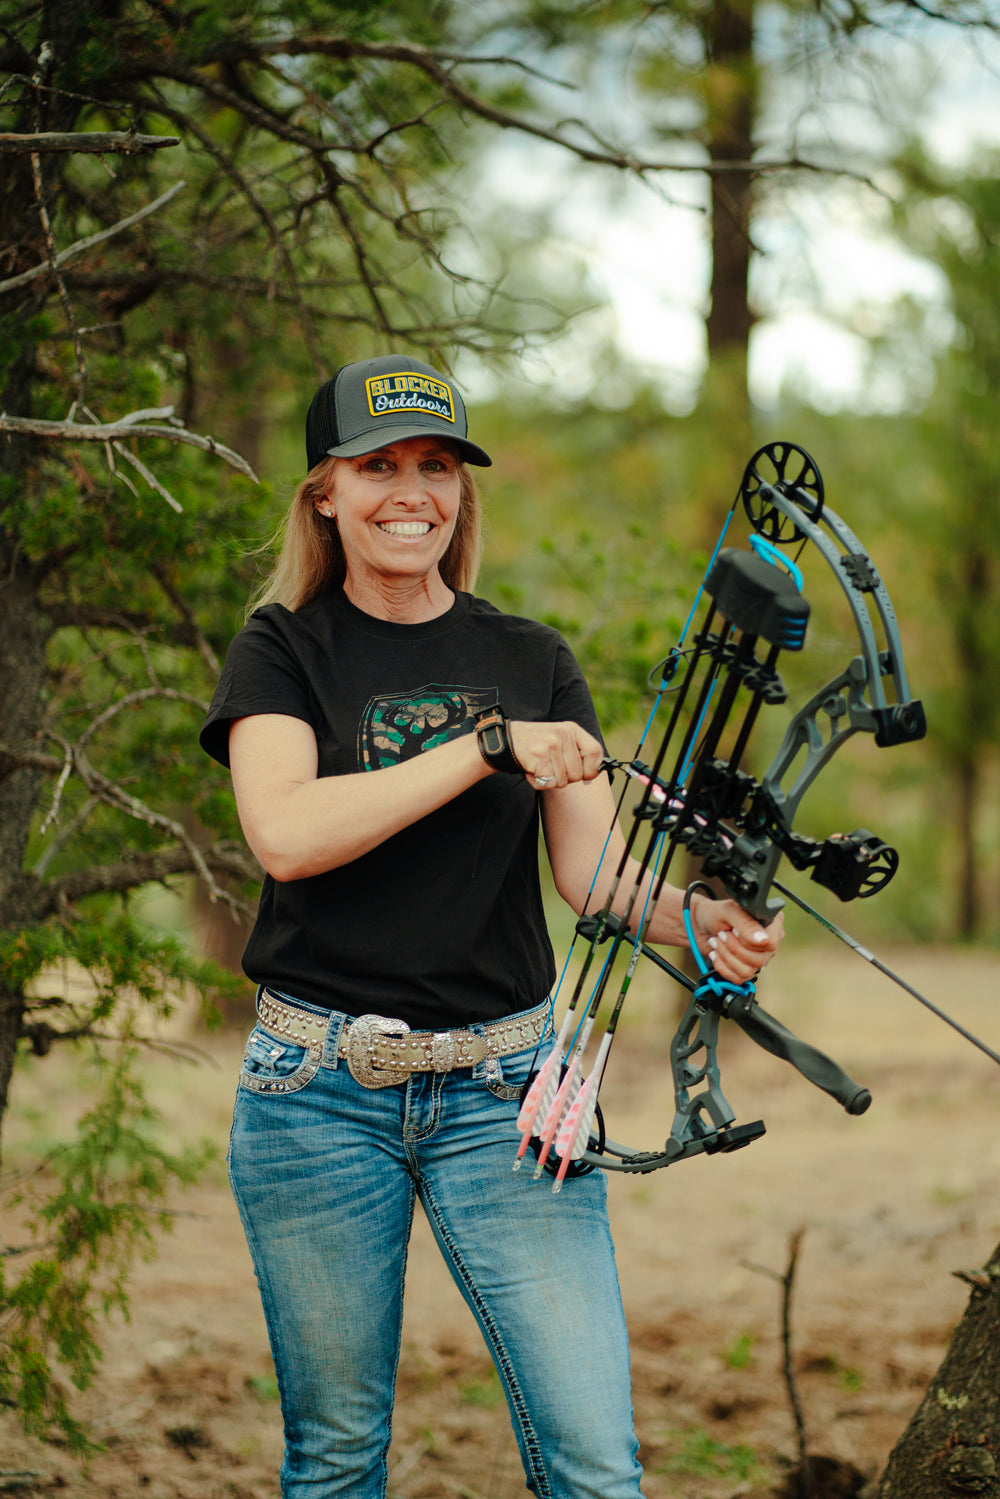 mother's day gift guide from bear archery - bear archery compound bows for women - mothers day gift ideas